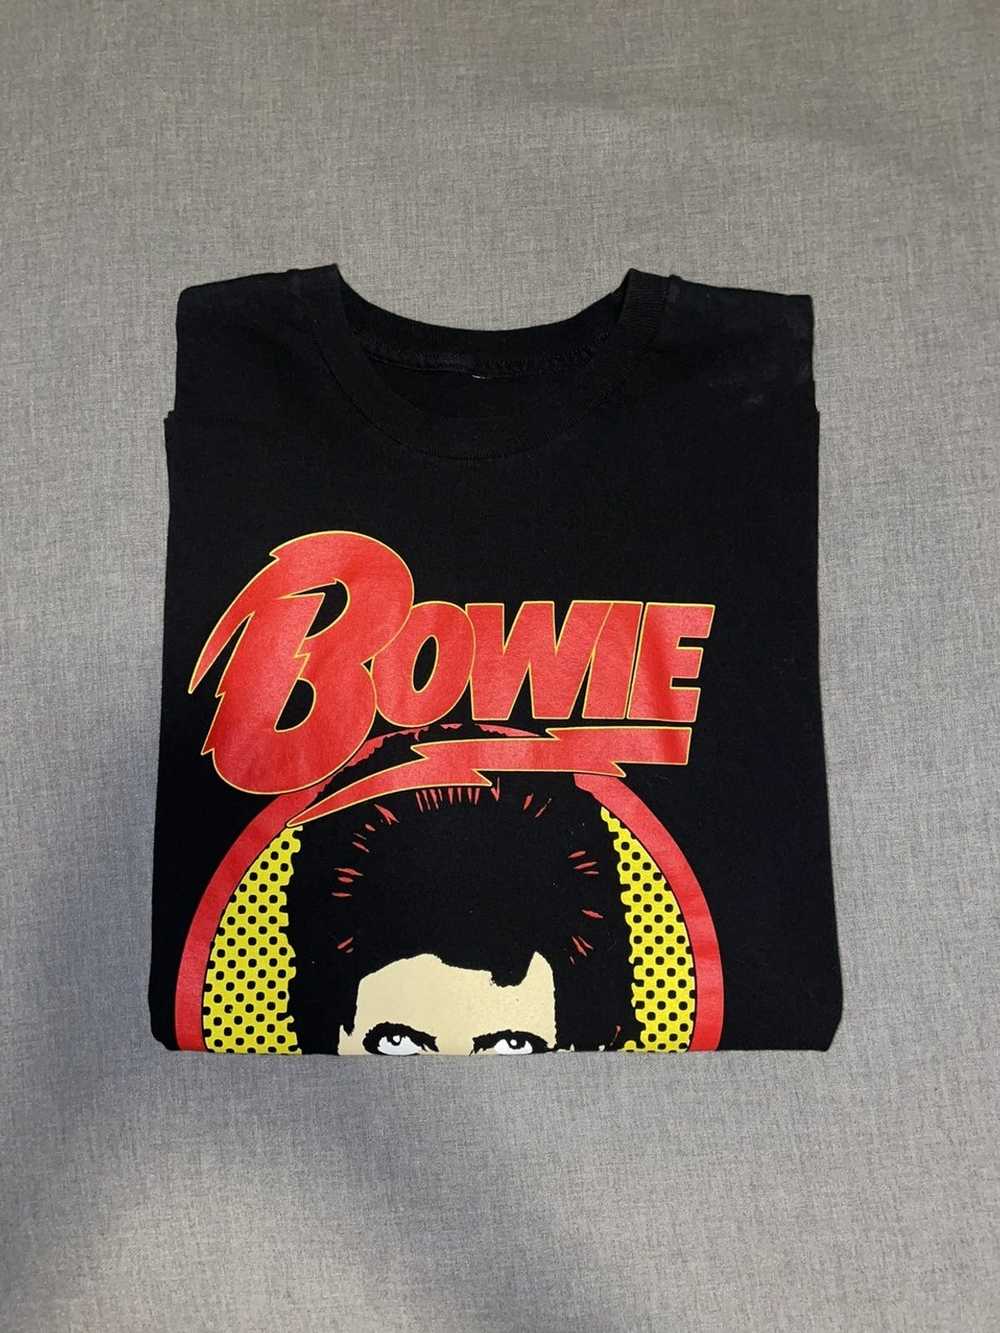 Vintage Early 2000s David Bowie tee - image 1